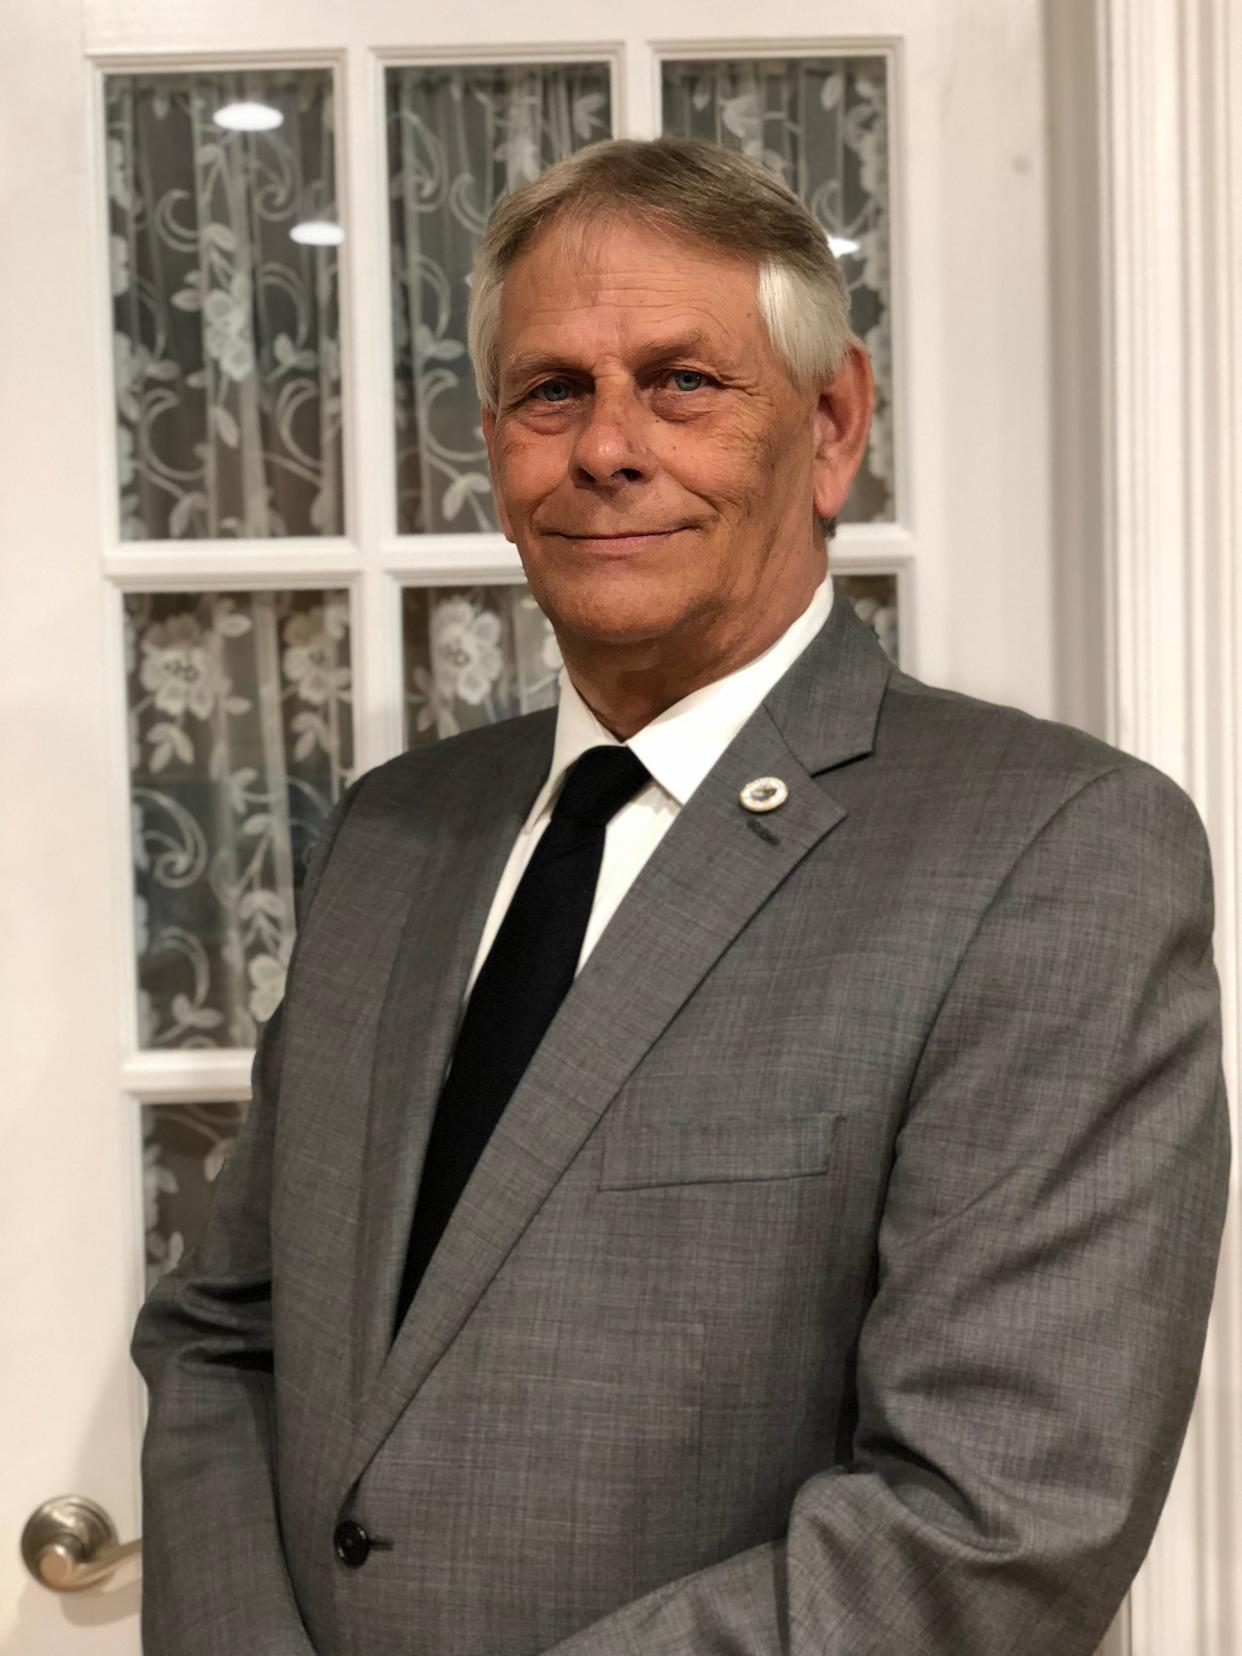 Terrebonne Parish Council Member Dirk Guidry, who is running for Terrebonne Parish President in the Fall. Guidry is also Owner of Pizza Express and Gator Mini Storage.